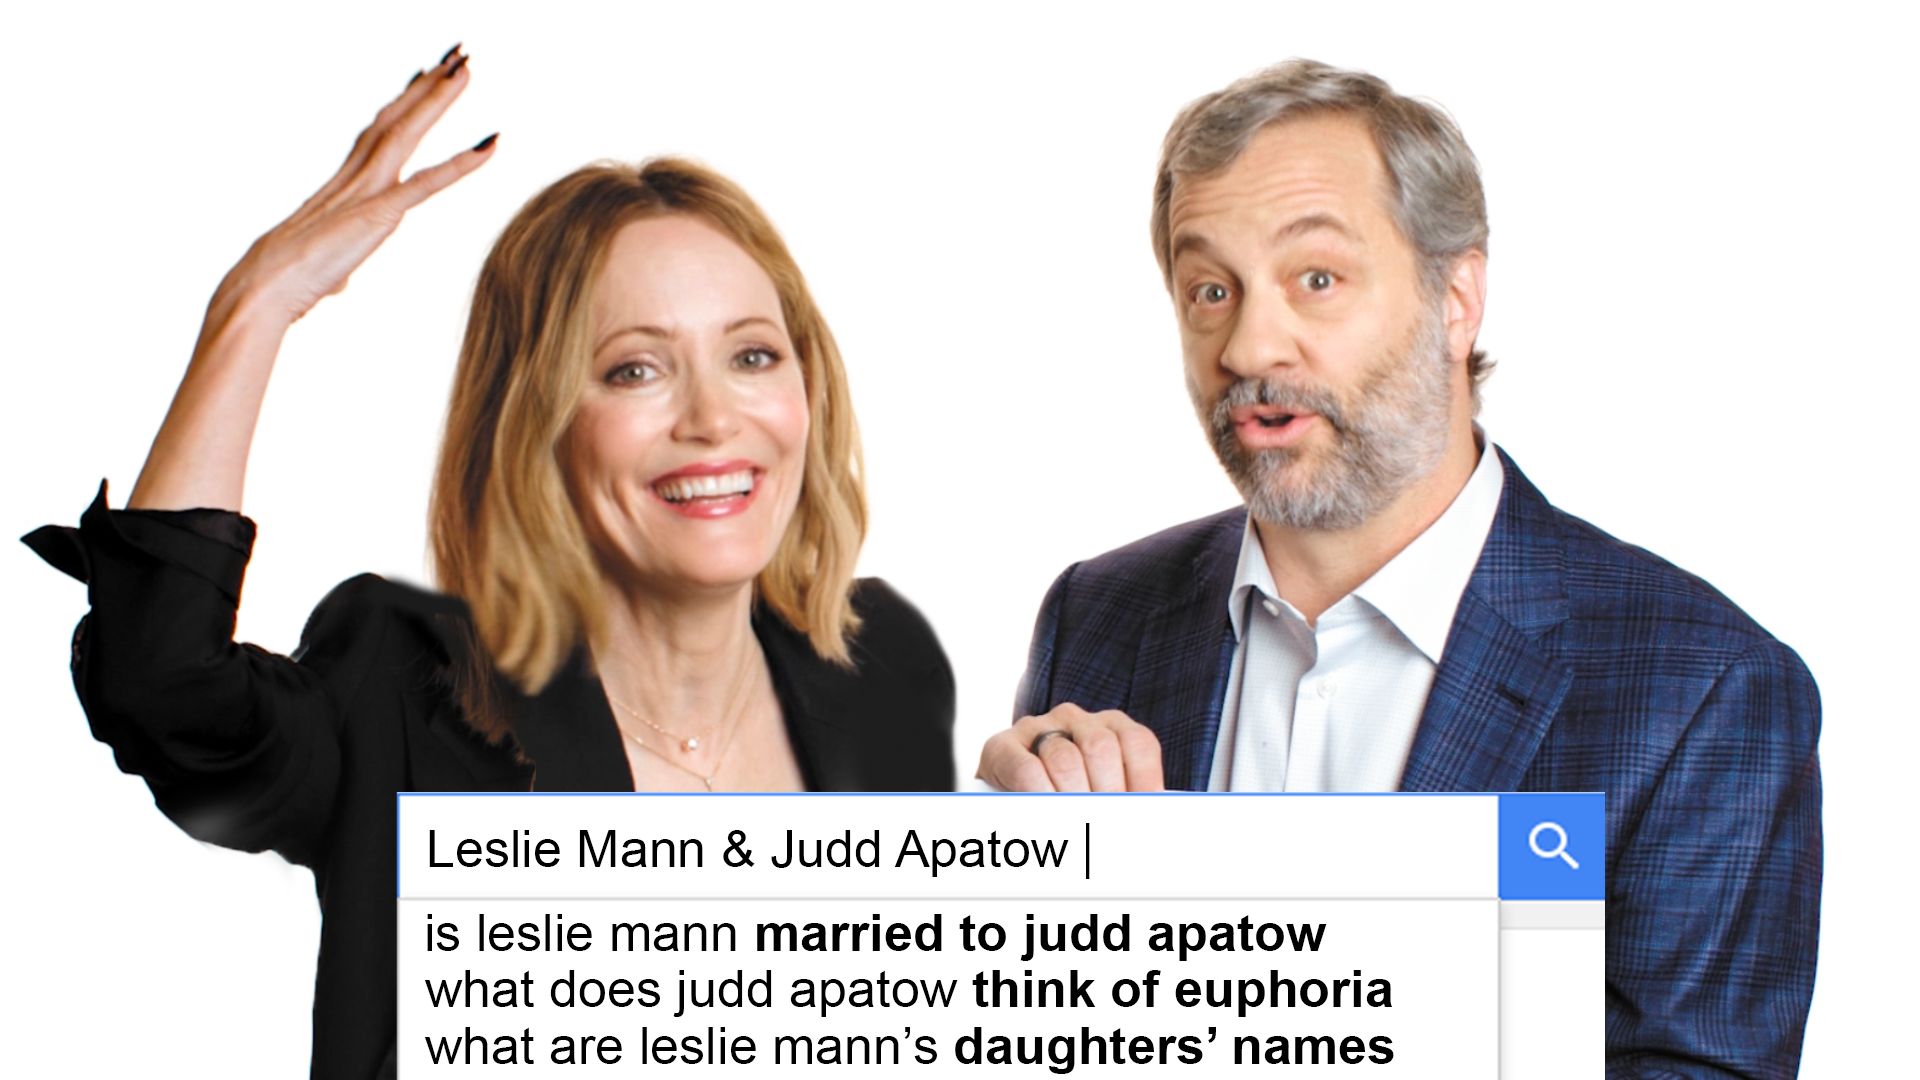 Watch Leslie Mann & Judd Apatow Answer the Web's Most Searched Questions, Autocomplete Interview